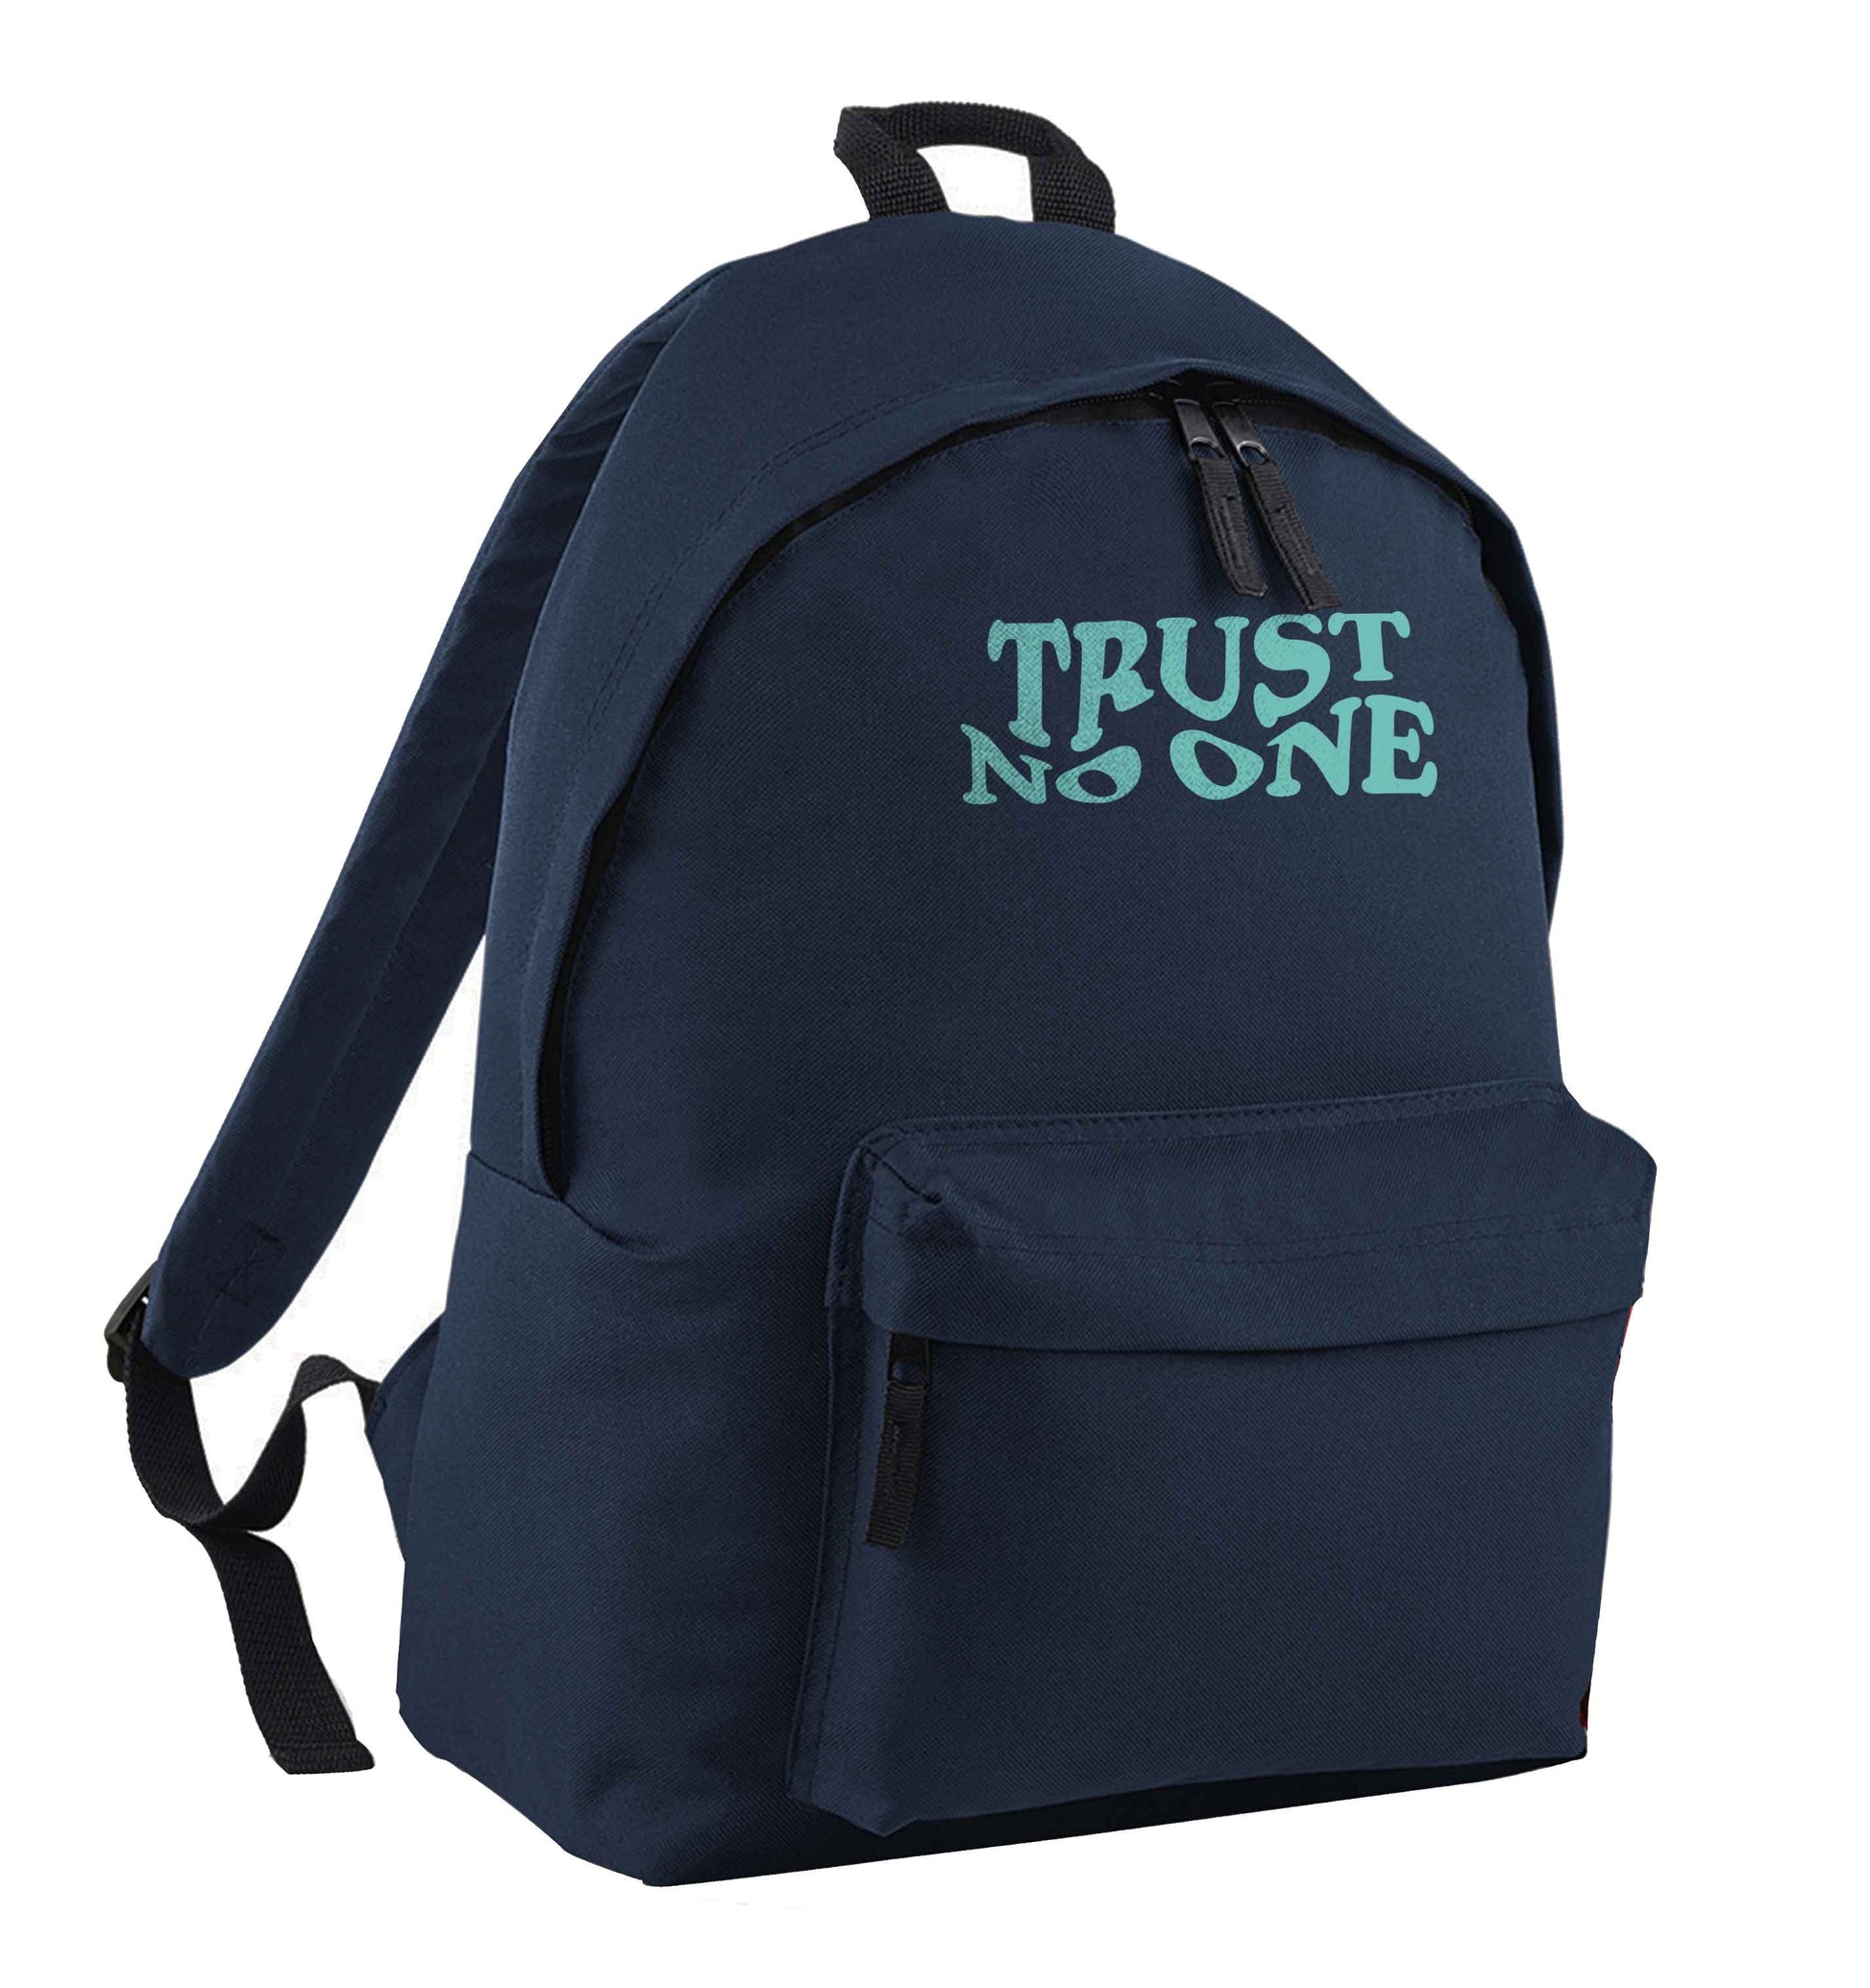 Trust no one navy adults backpack